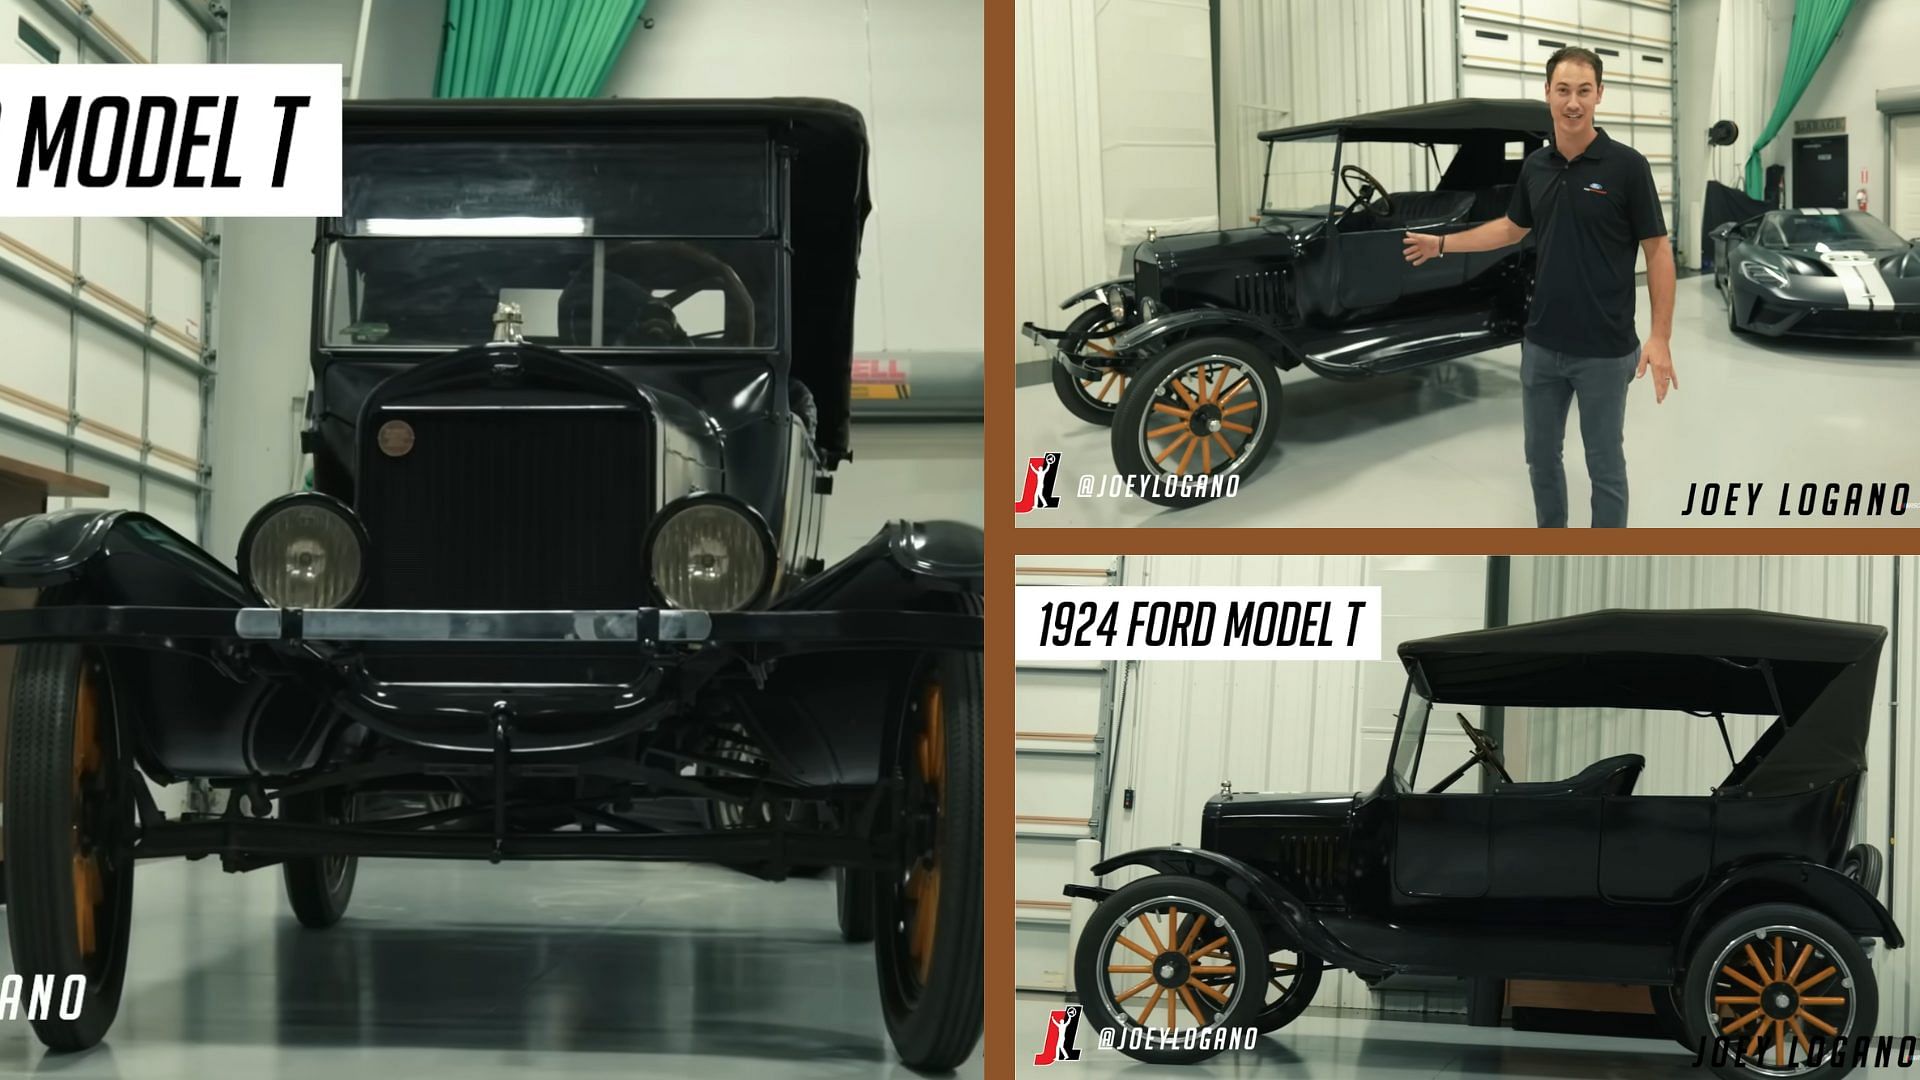 Joey Logano and his 1924 Ford Model T